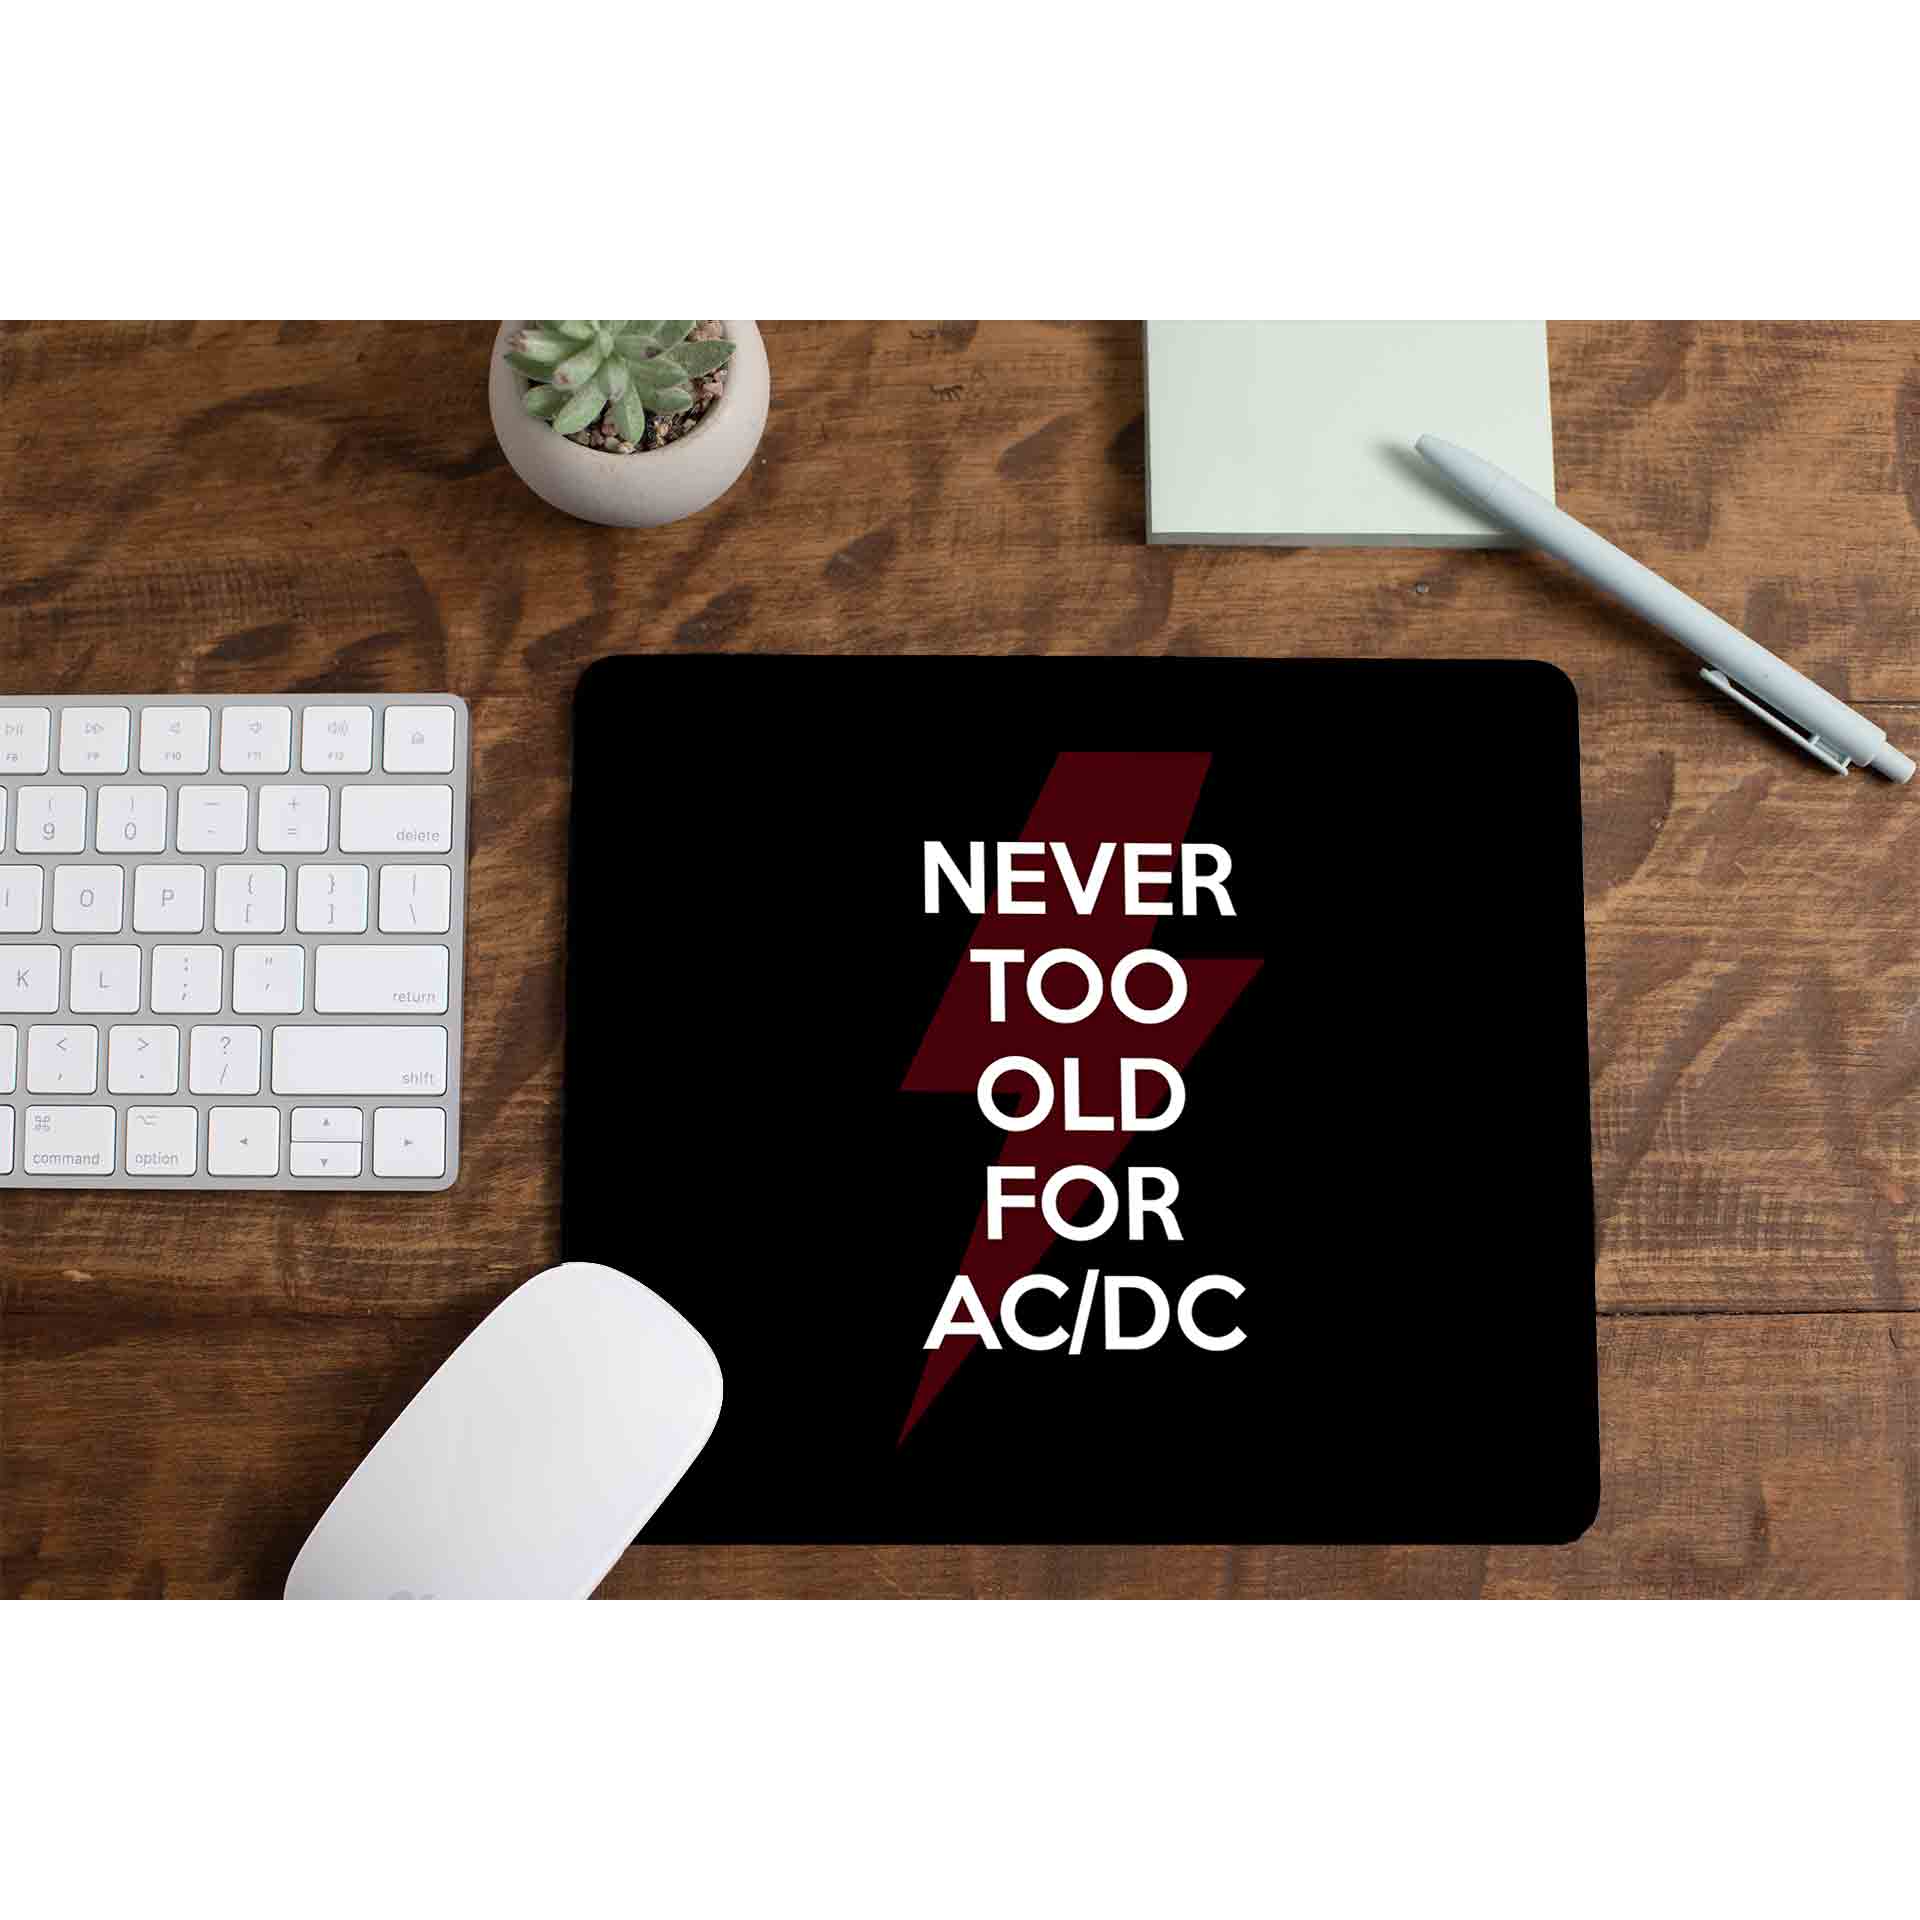 ac/dc never too old for ac/dc mousepad logitech large anime music band buy online india the banyan tee tbt men women girls boys unisex